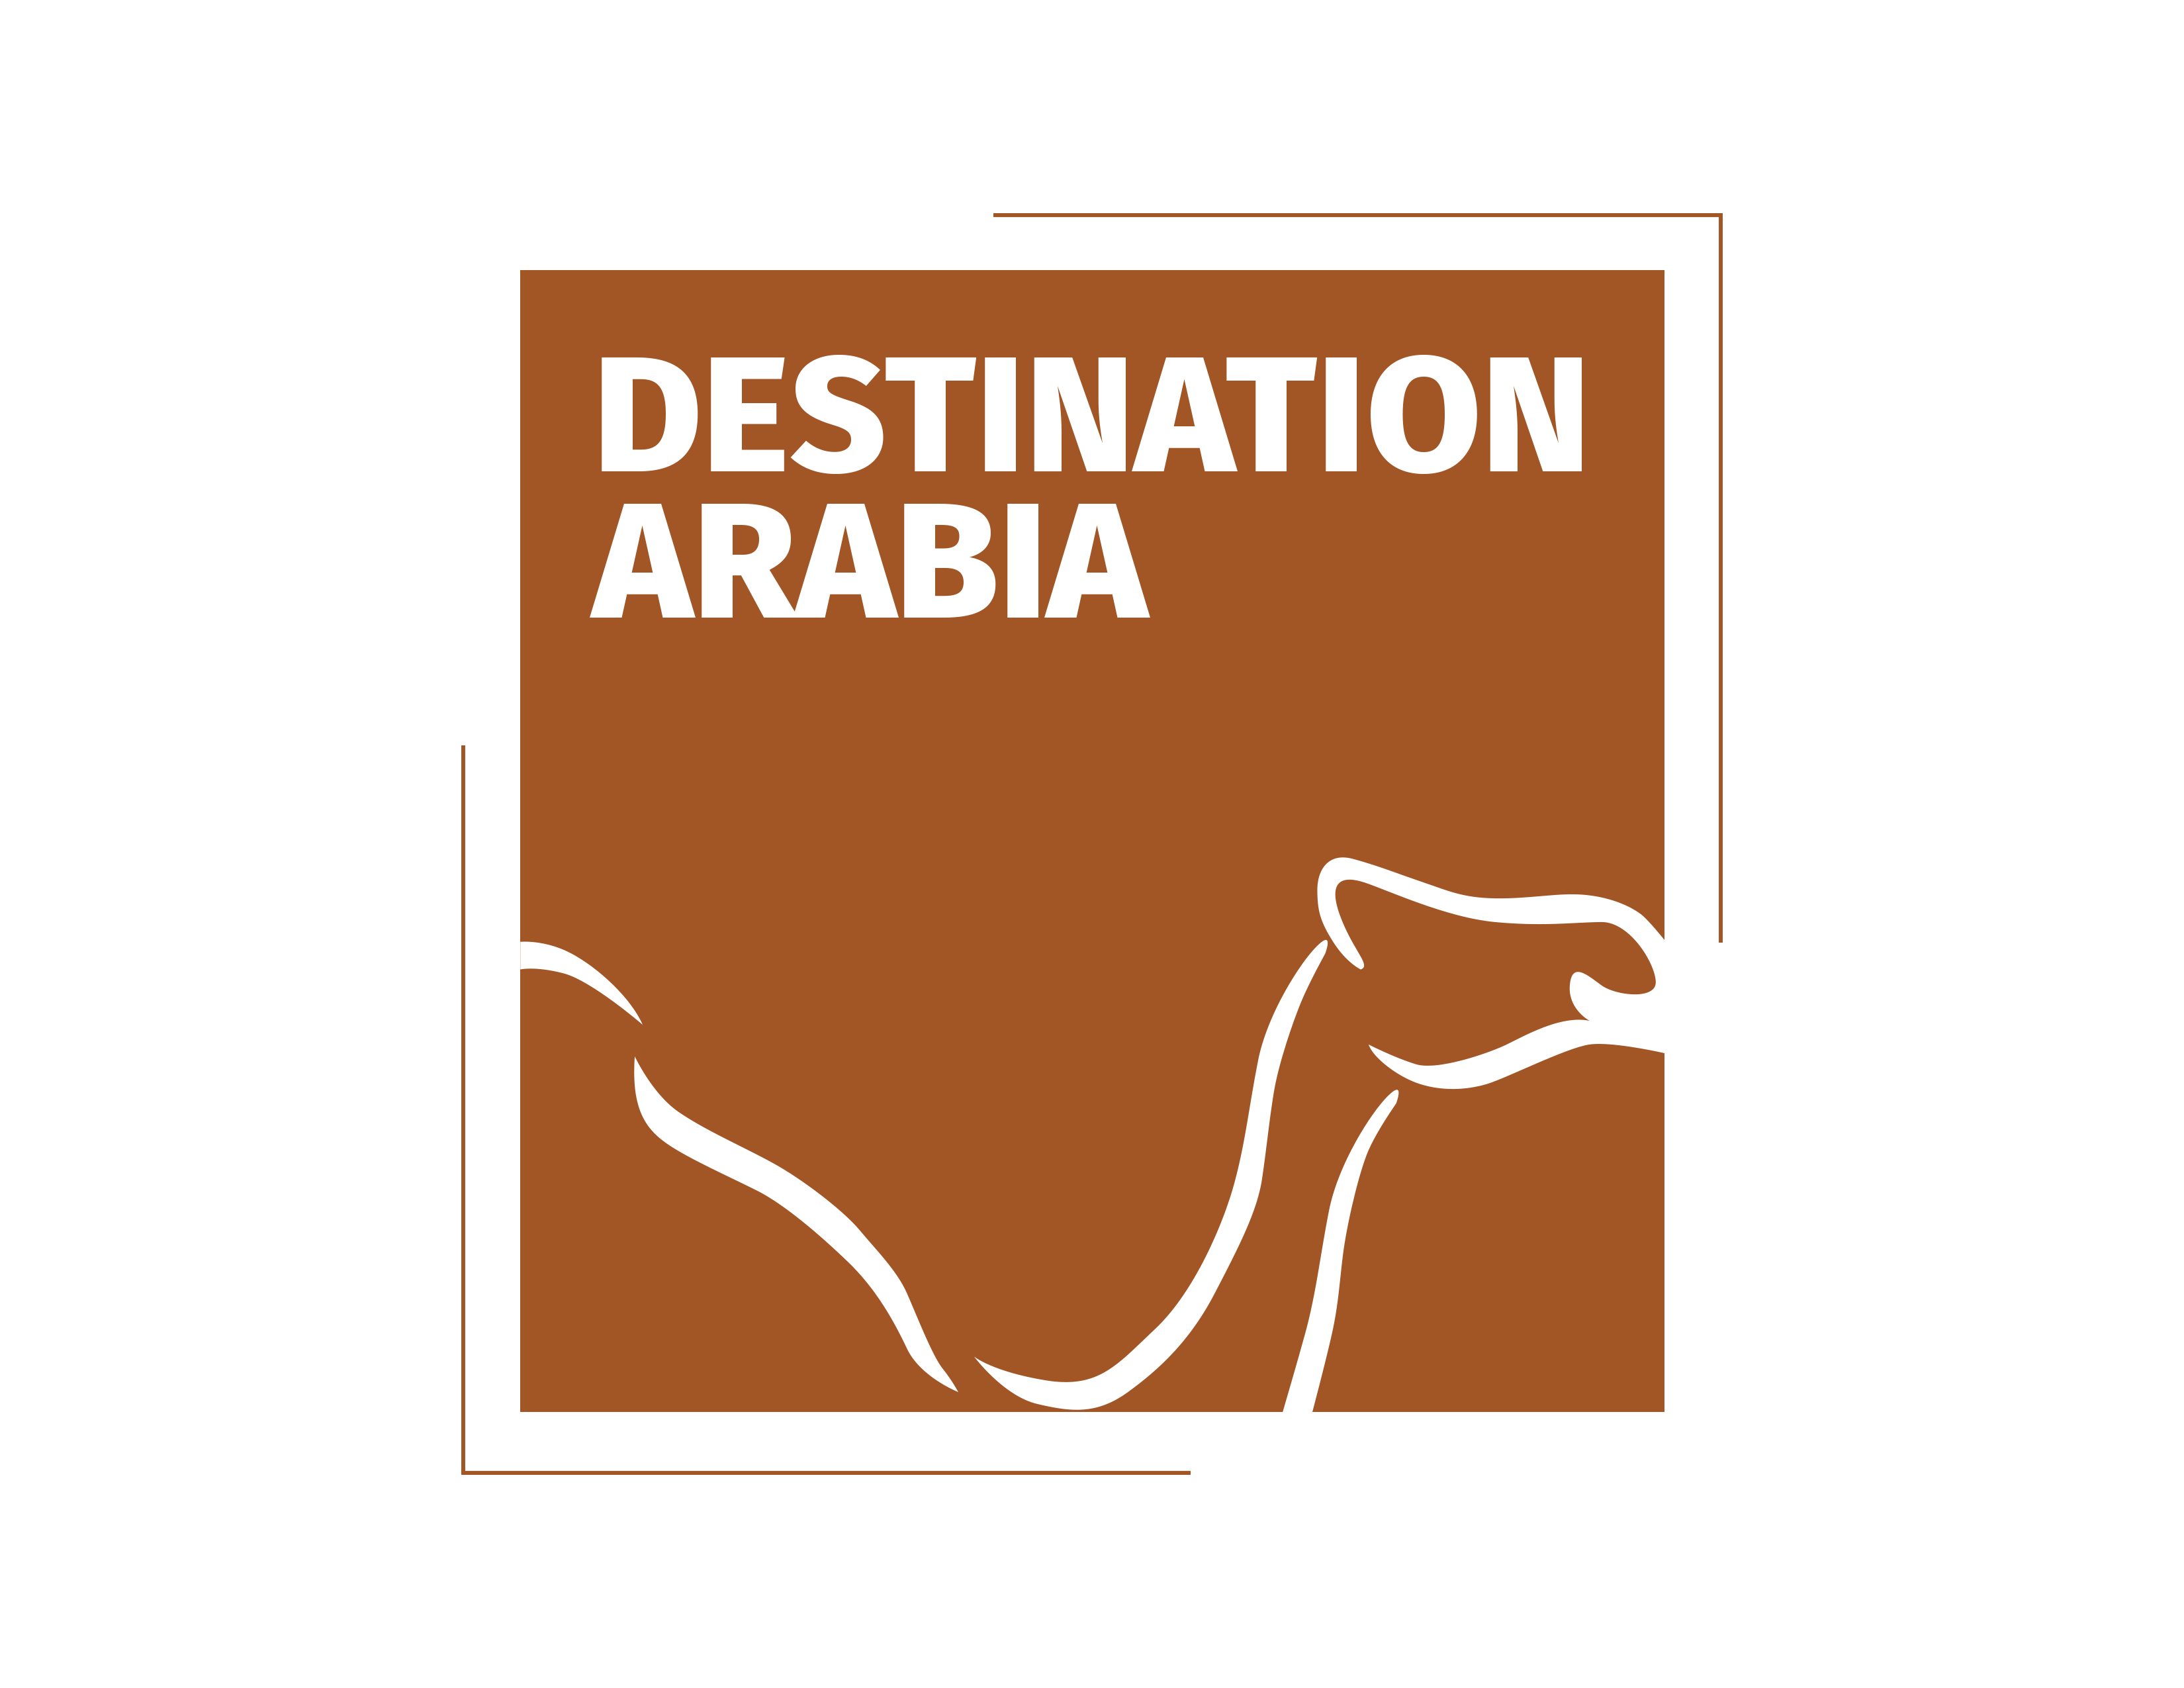 Destination Arabia - MICE Agency based in Dubai-Abu Dhabi-Oman .... owned by two passionate MICE experts .. Jestine & Dev